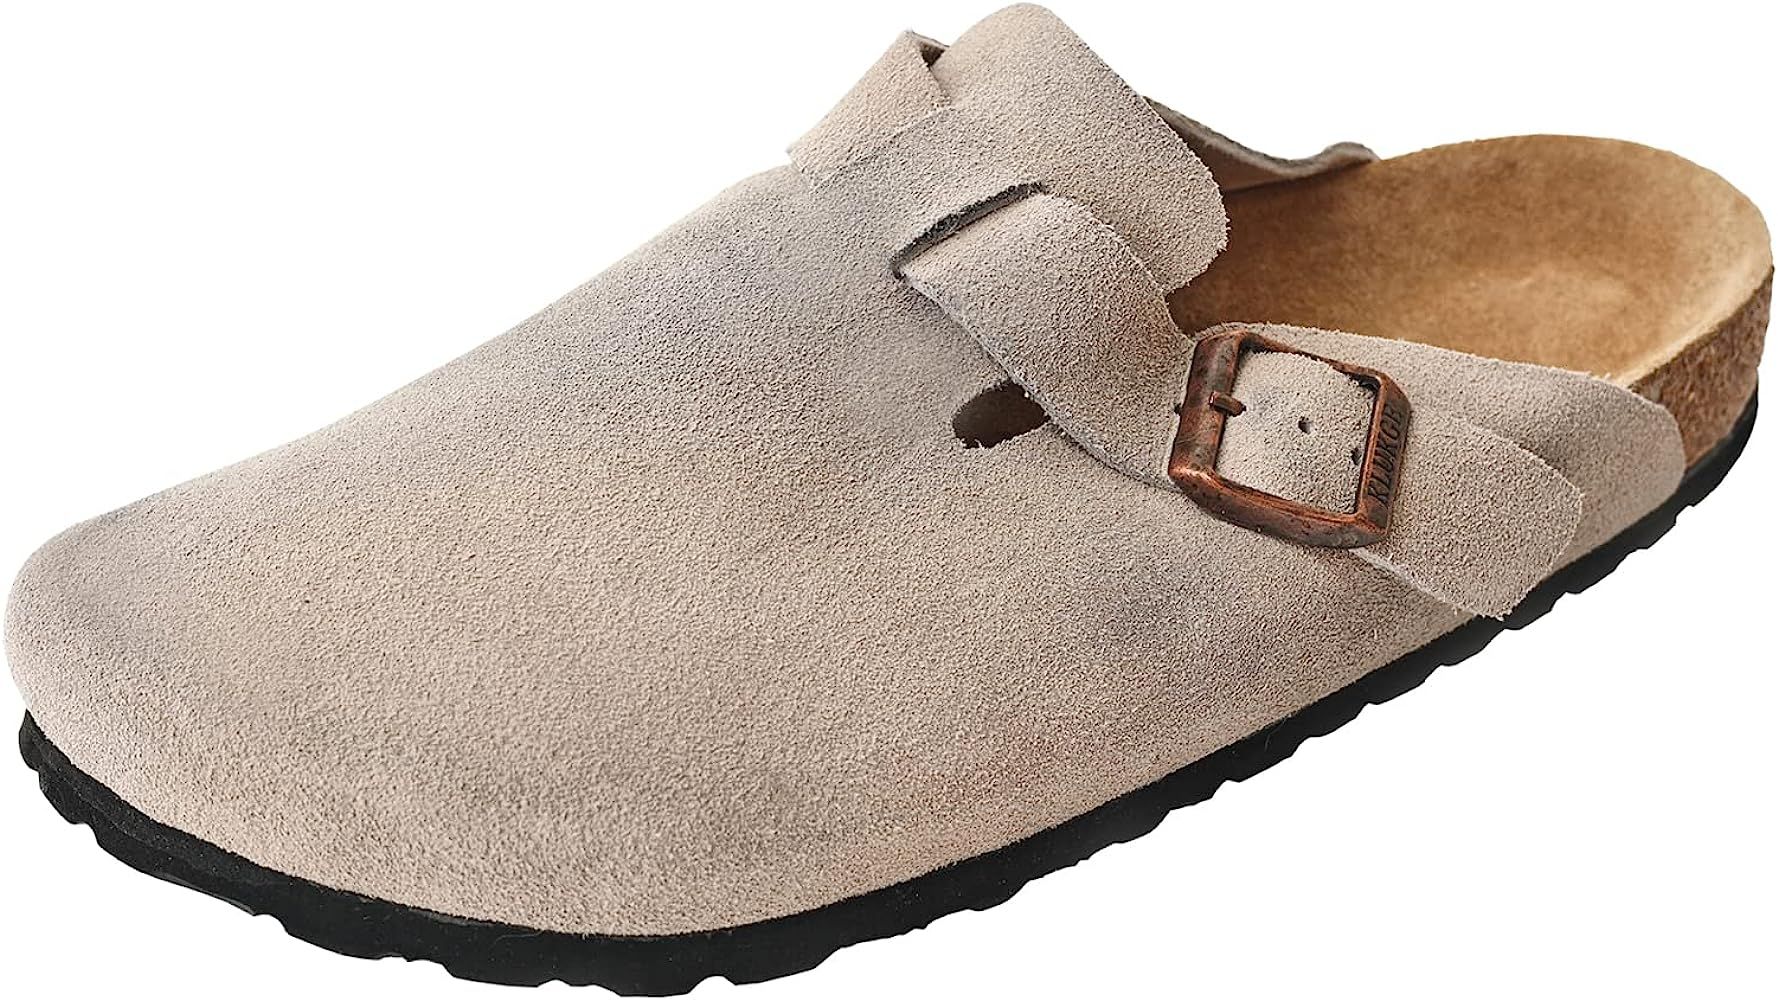 KLUKGE Boston Clogs for Men, Women‘s Suede Soft Leather Clogs with Arch Support and Adjustable ... | Amazon (US)